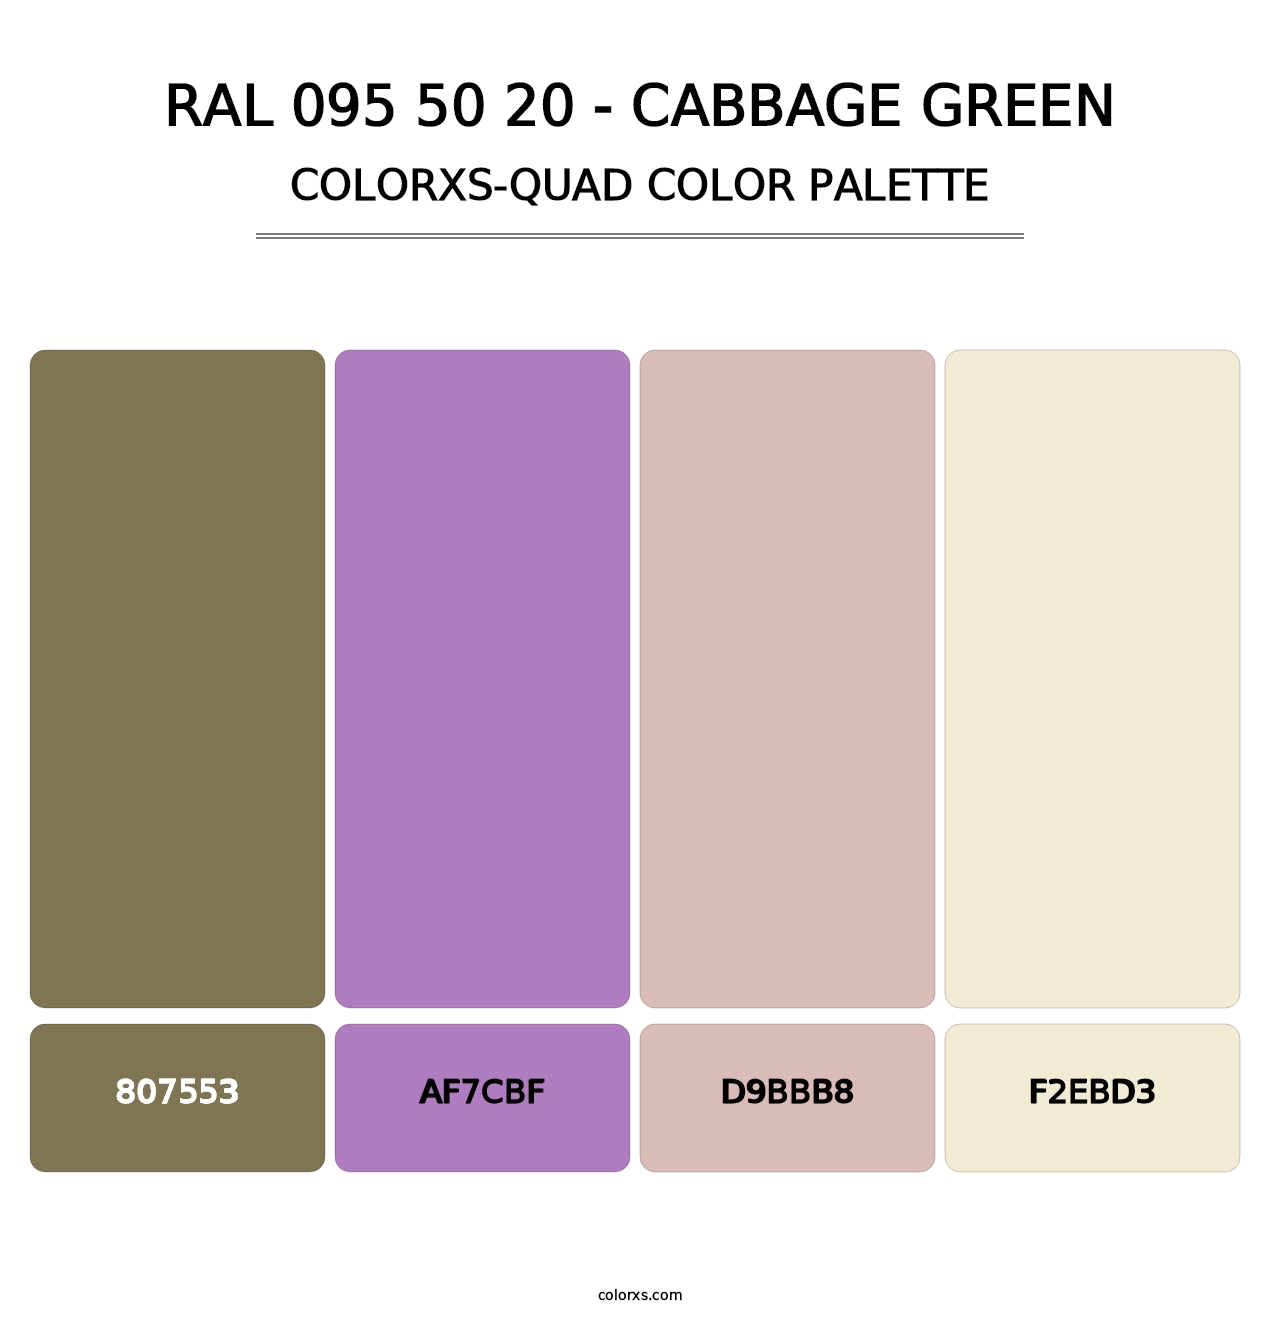 RAL 095 50 20 - Cabbage Green - Colorxs Quad Palette